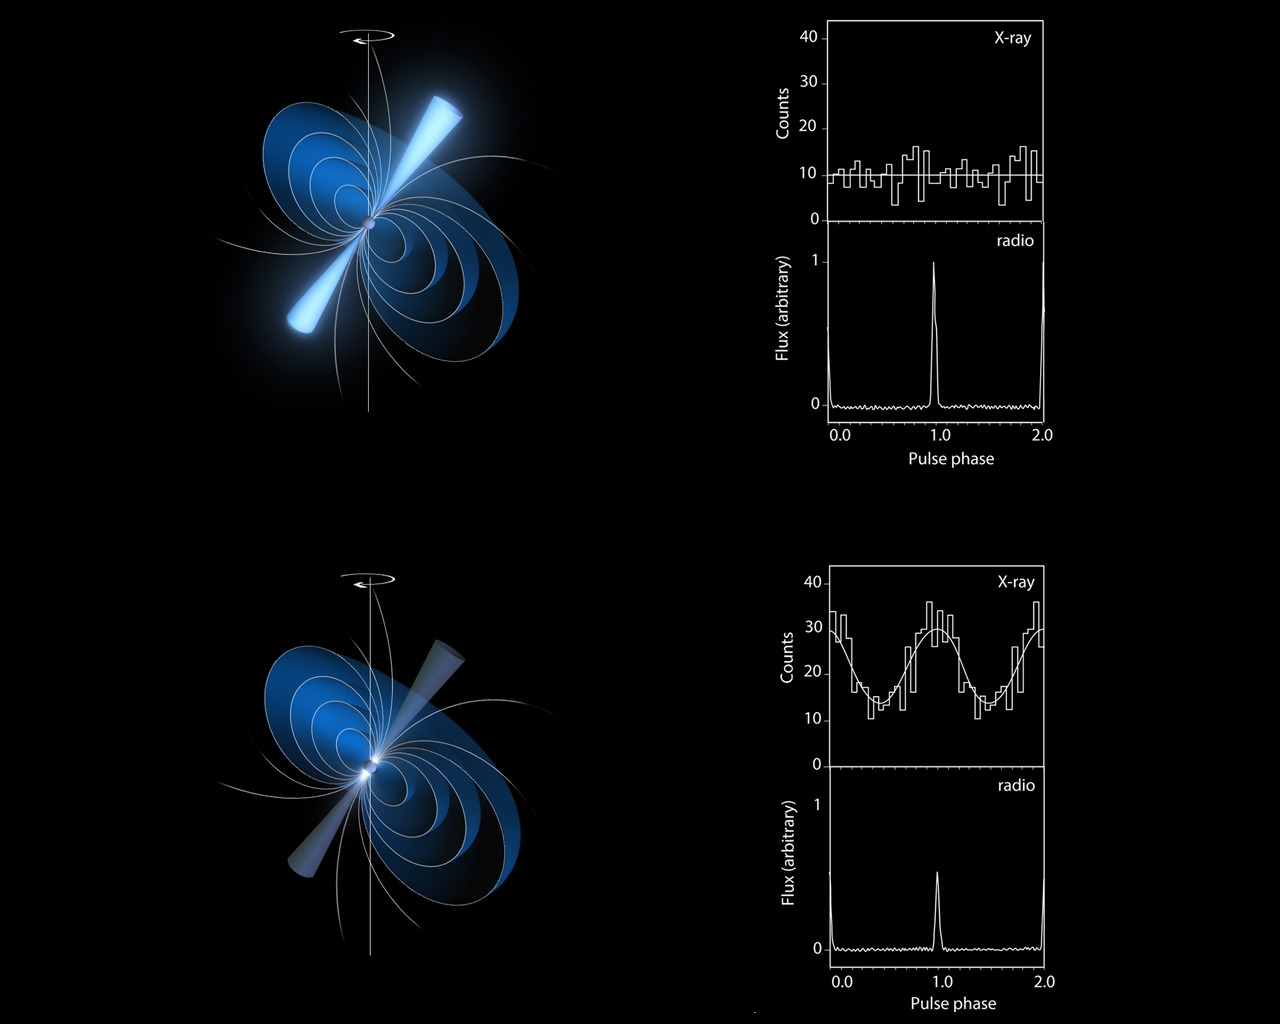 This diagram shows how the pulsar switches on and off.